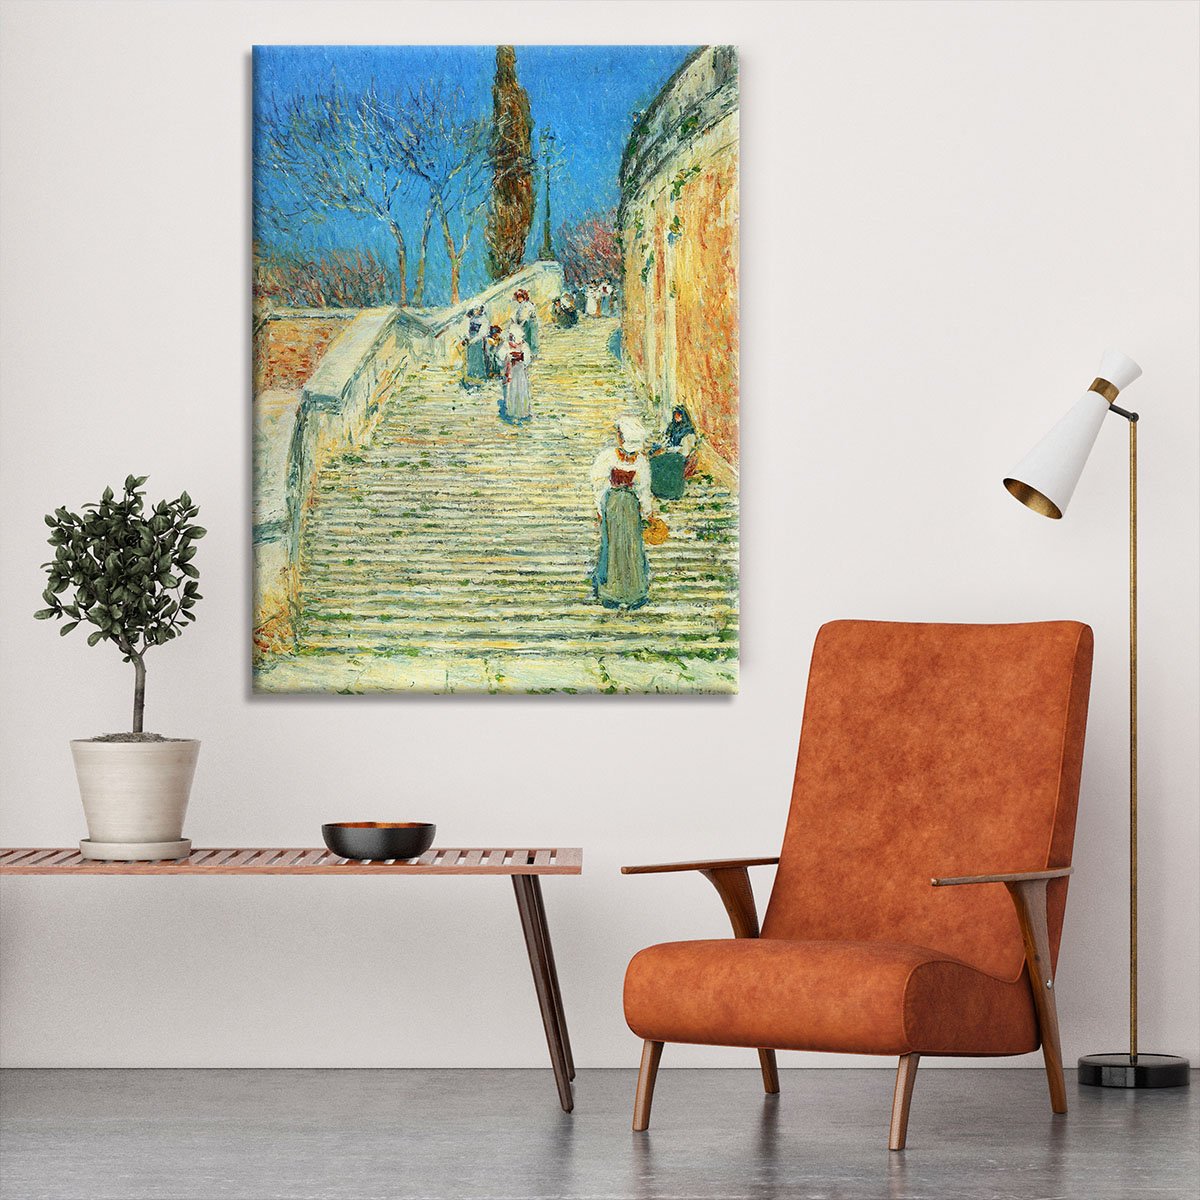 Piazza di Spagna Rome by Hassam Canvas Print or Poster